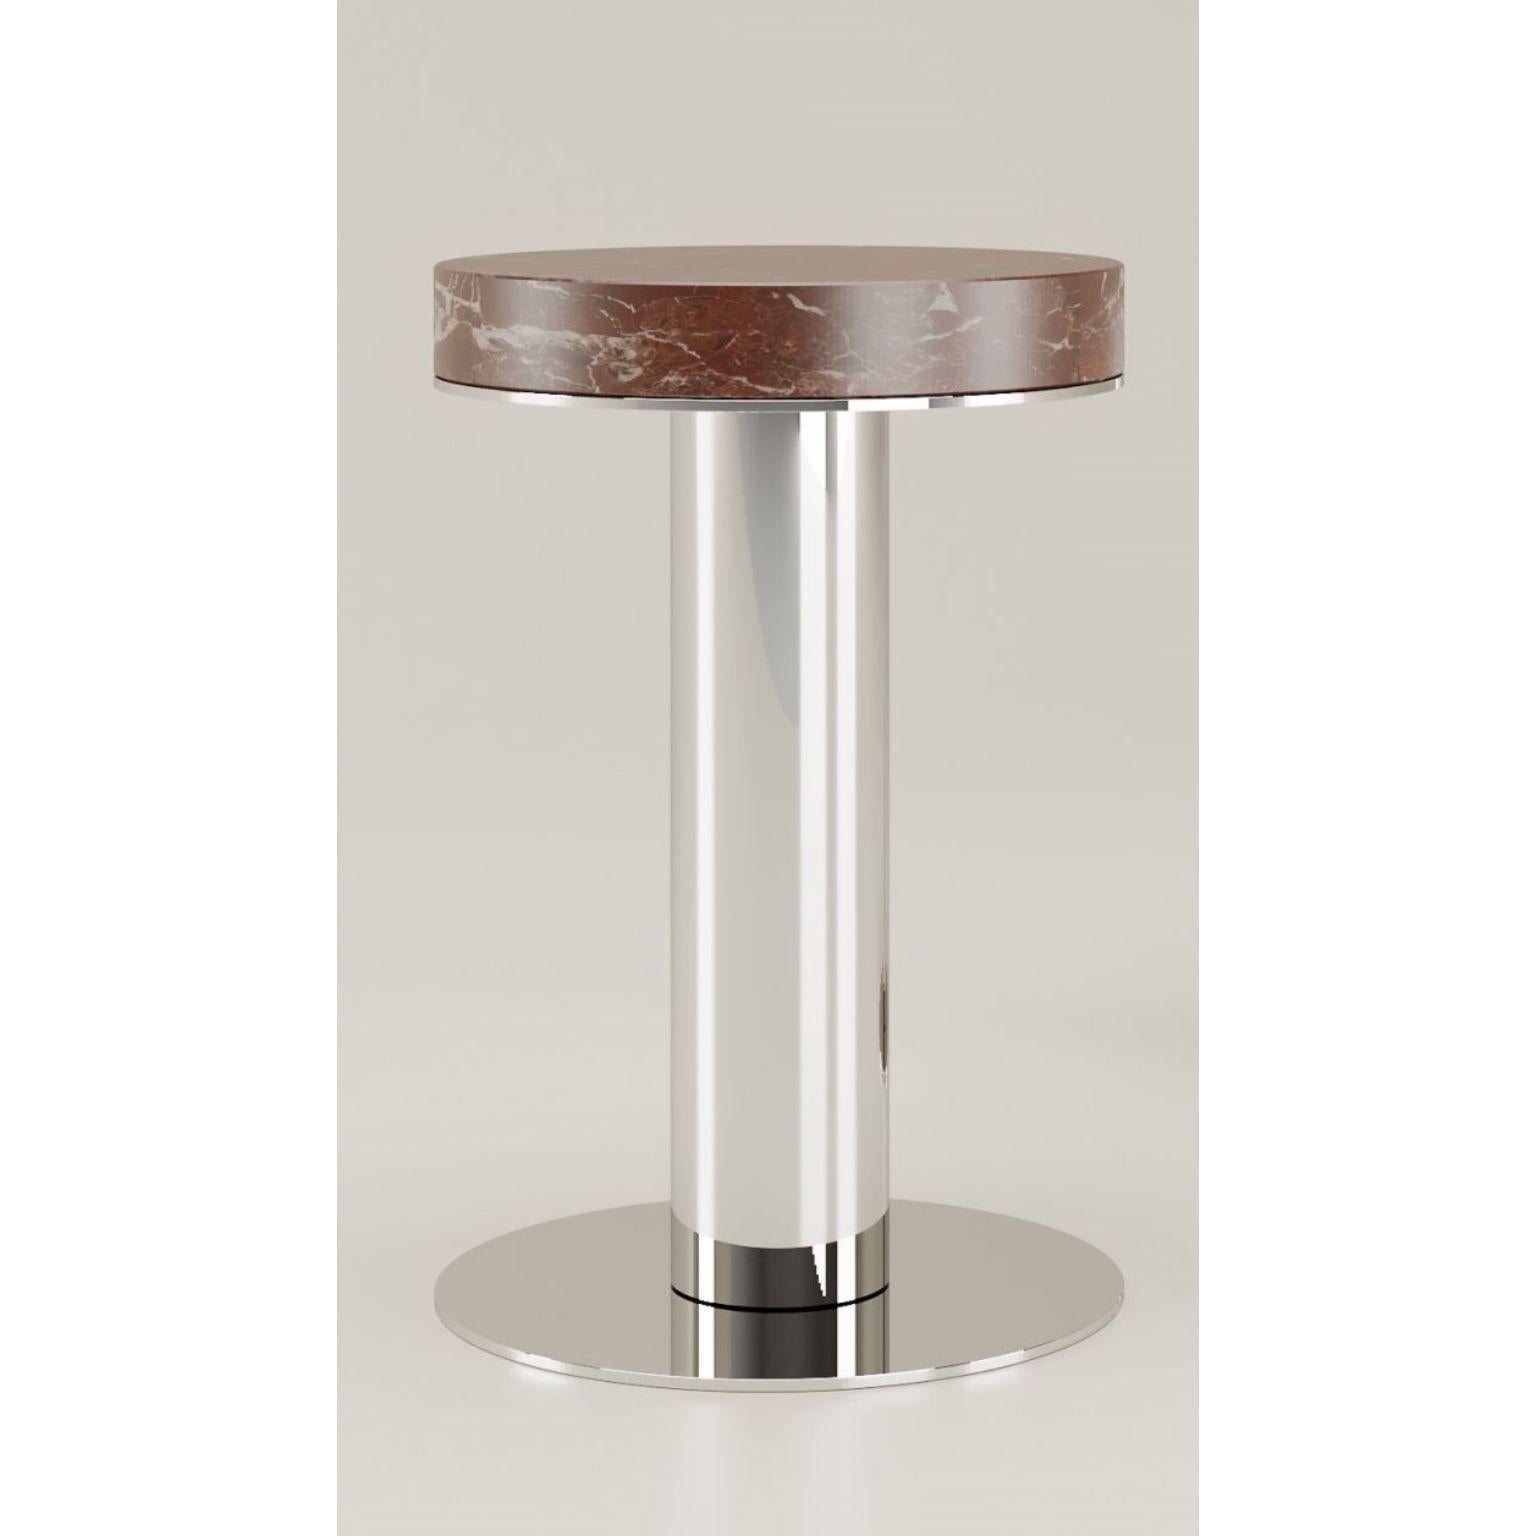 Rosso Lepanto Nail Side Table by Andrea Bonini
Limited Edition
Dimensions: Ø 35 x H 60 cm.
Materials: Rosso Lepanto marble and polished steel. 

Made in Italy. Limited series, numbered and signed pieces. Custom size or finish on request.  Also